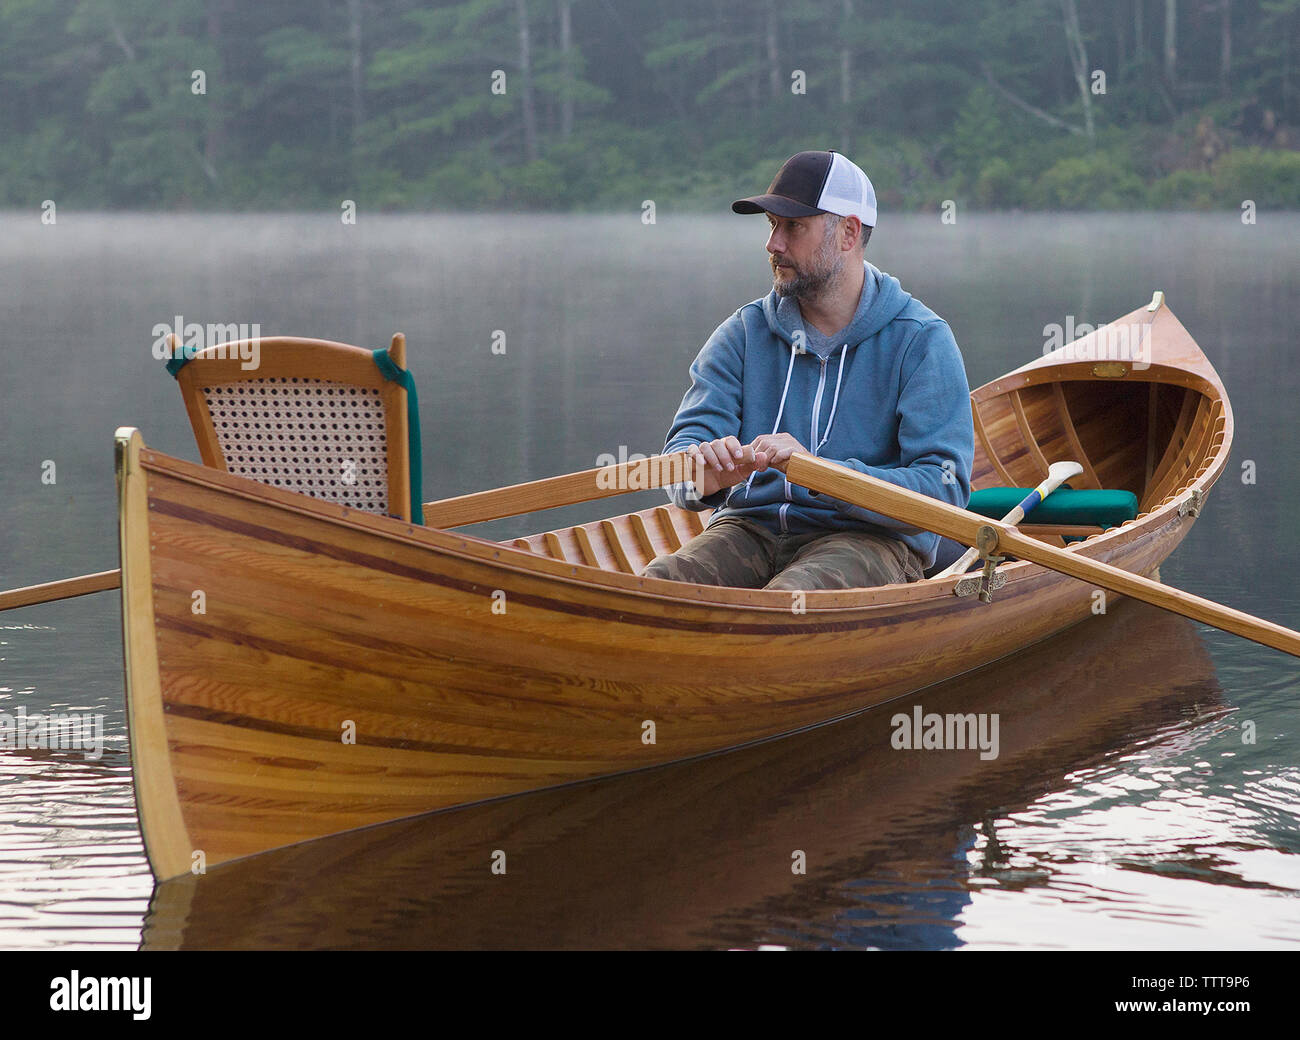 Man looking away while rowing boat on lake against trees during sunset Stock Photo